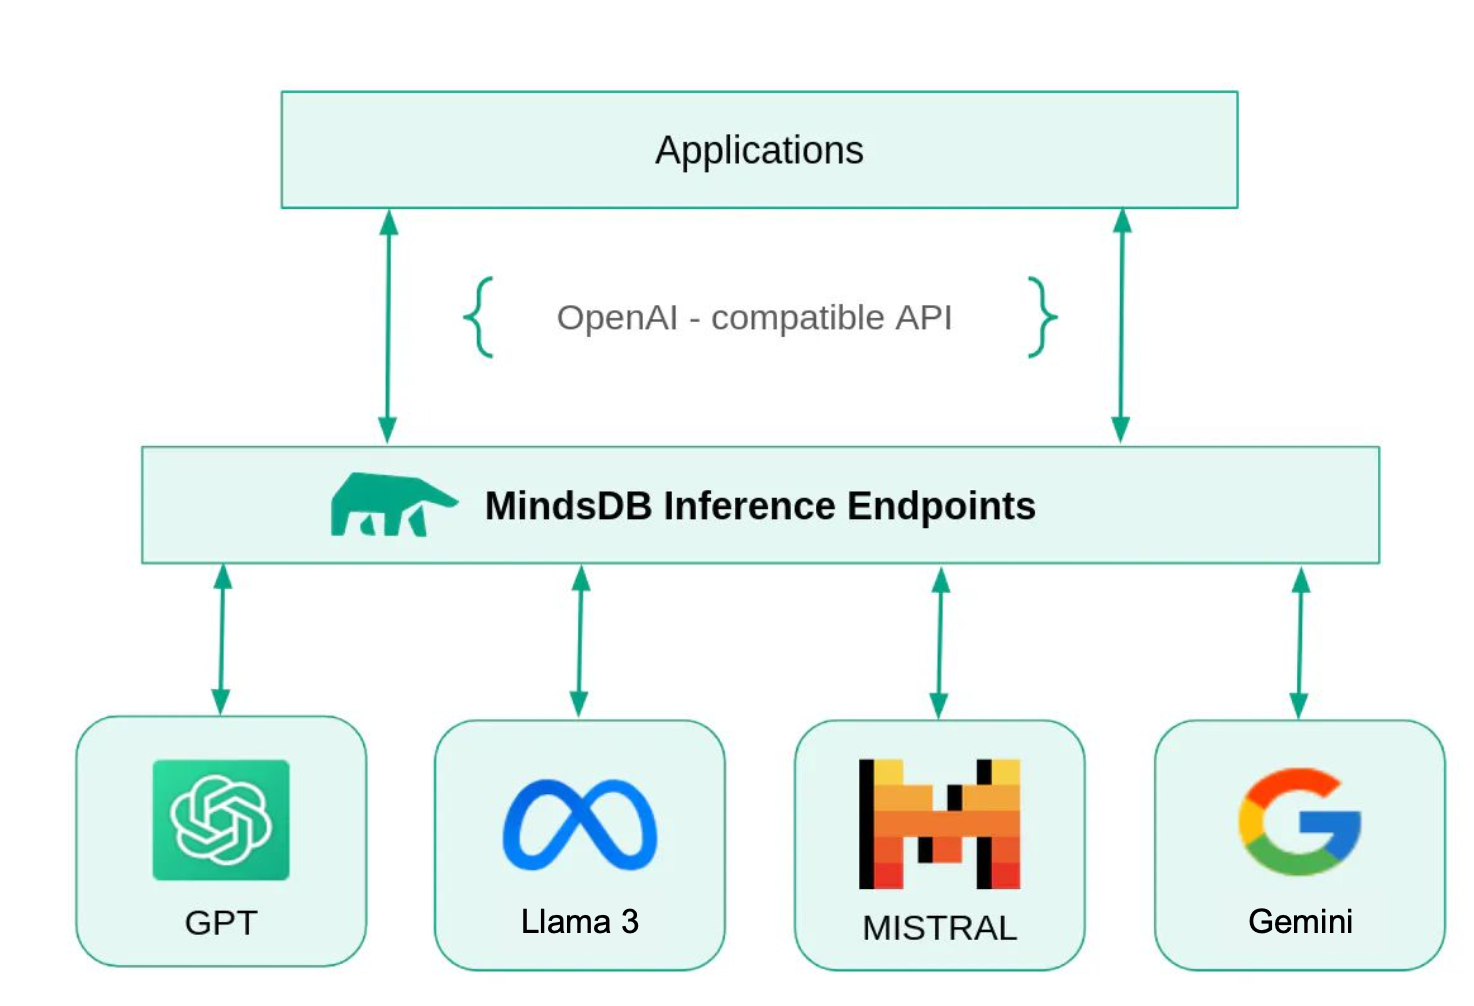 MindsDB Inference Endpoints